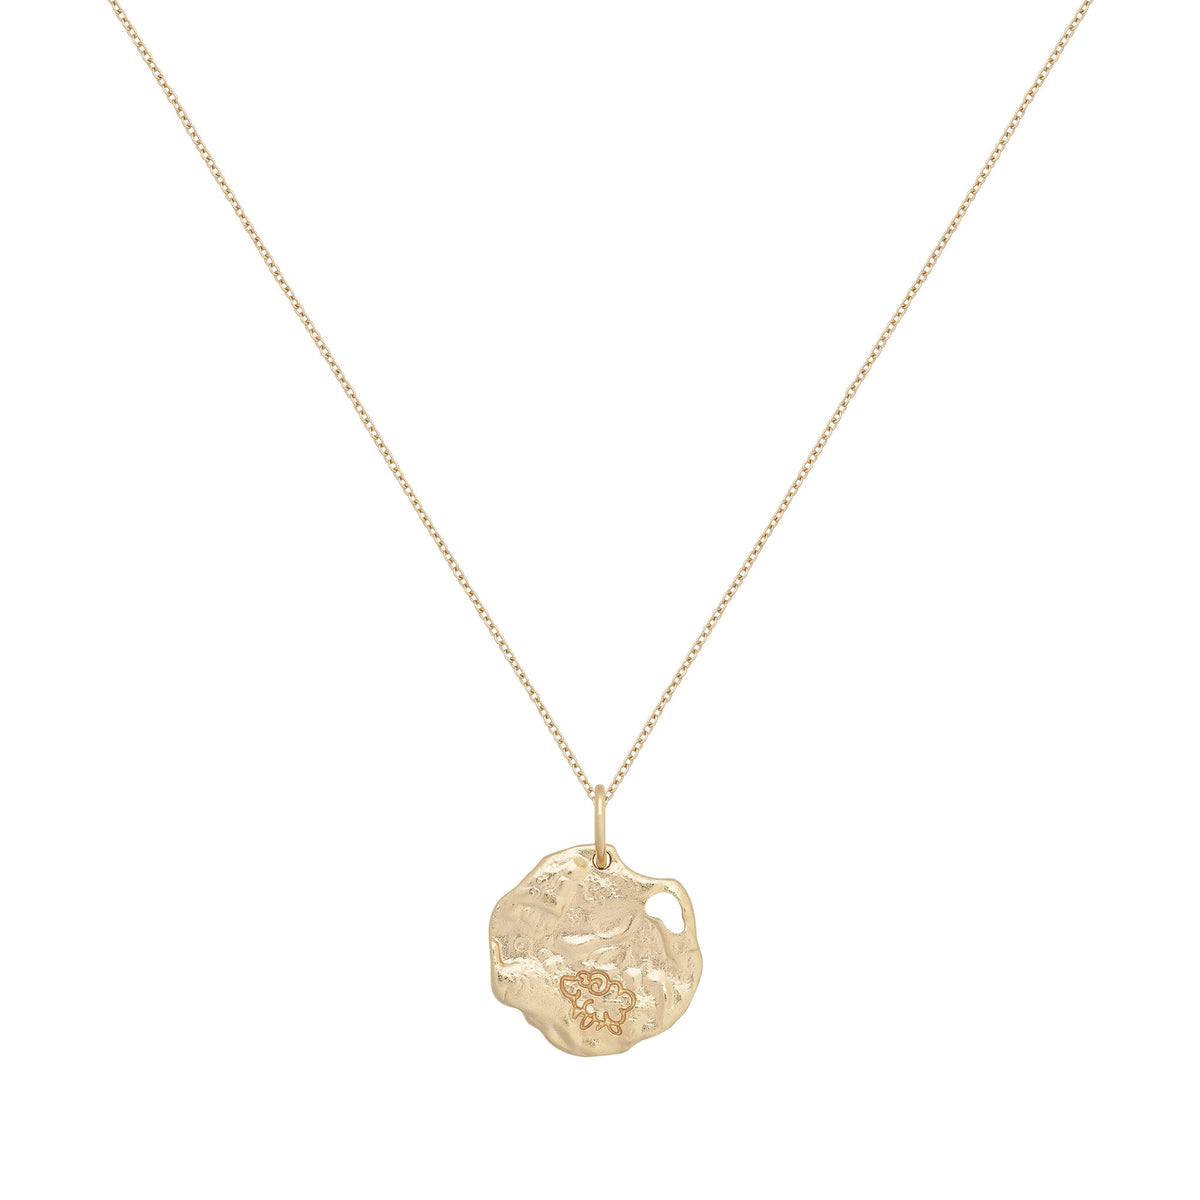 Aries Astrology Necklace